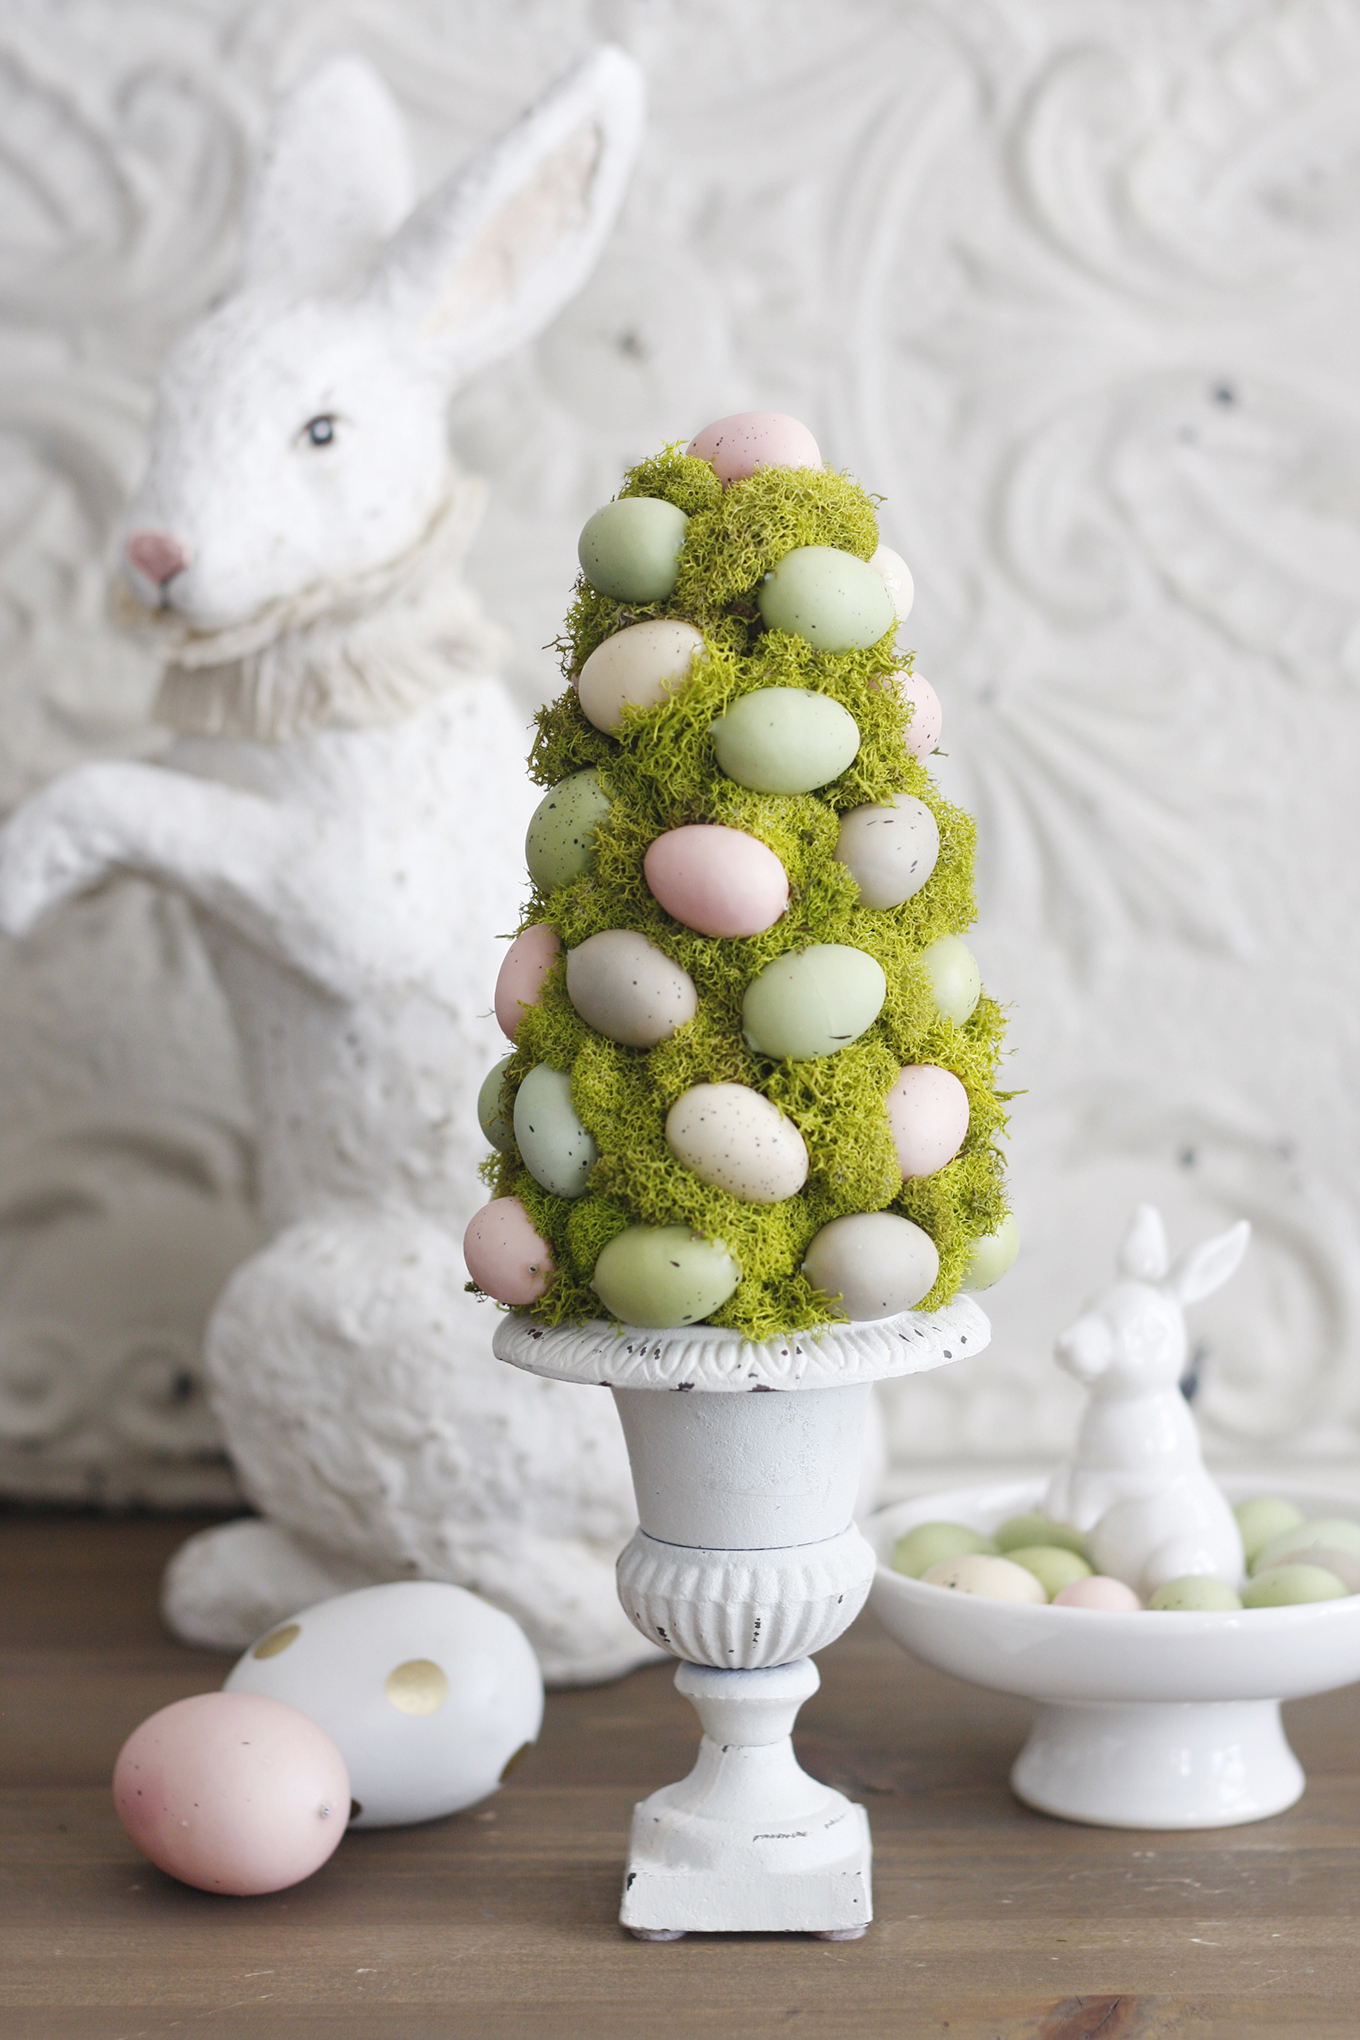 07_Paige Smith_Easter Topiary_MG_9641